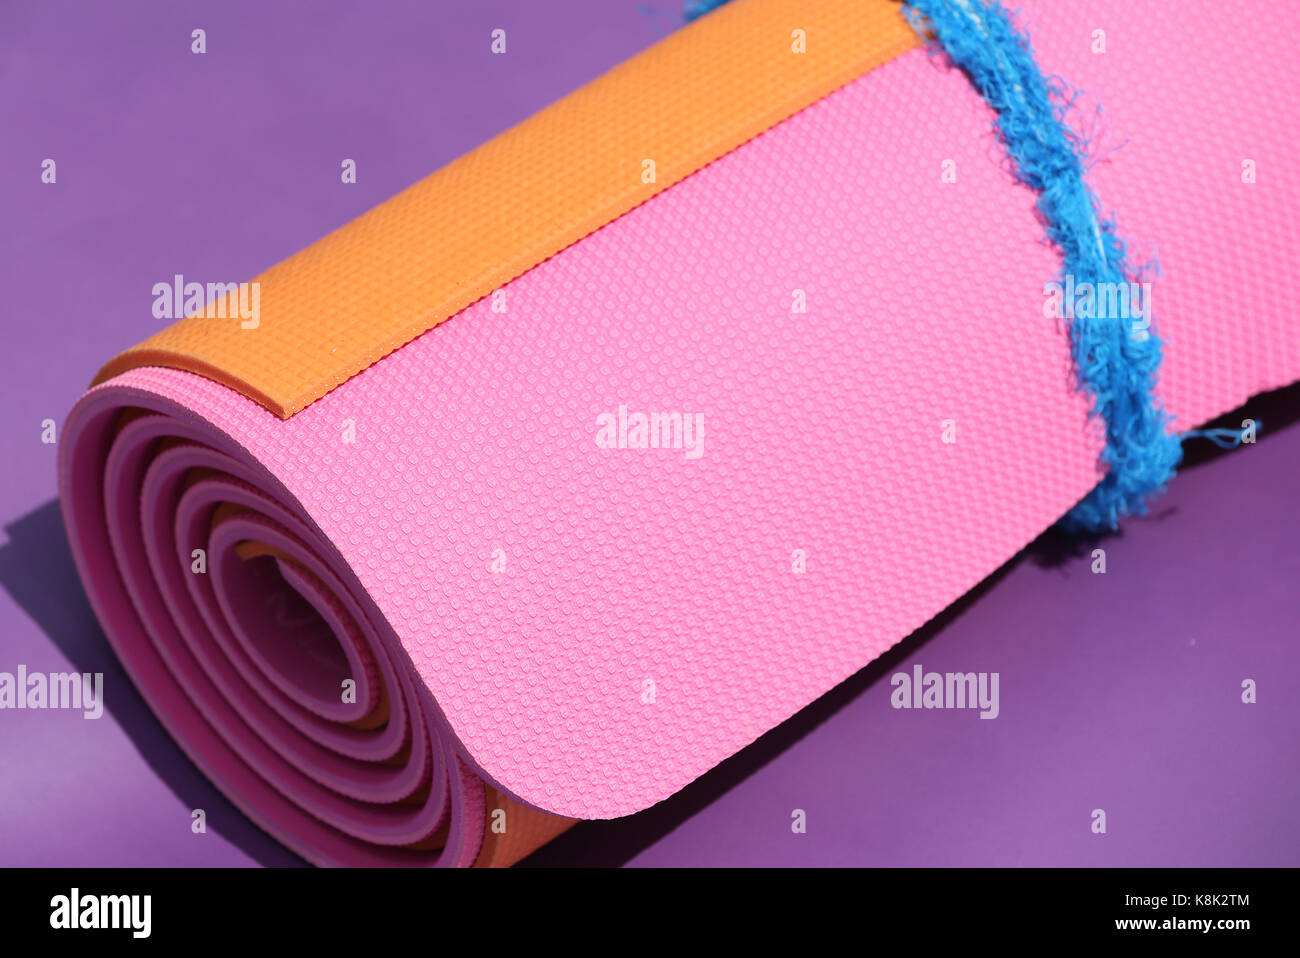 Rolled up pink yoga mat. france. Stock Photo